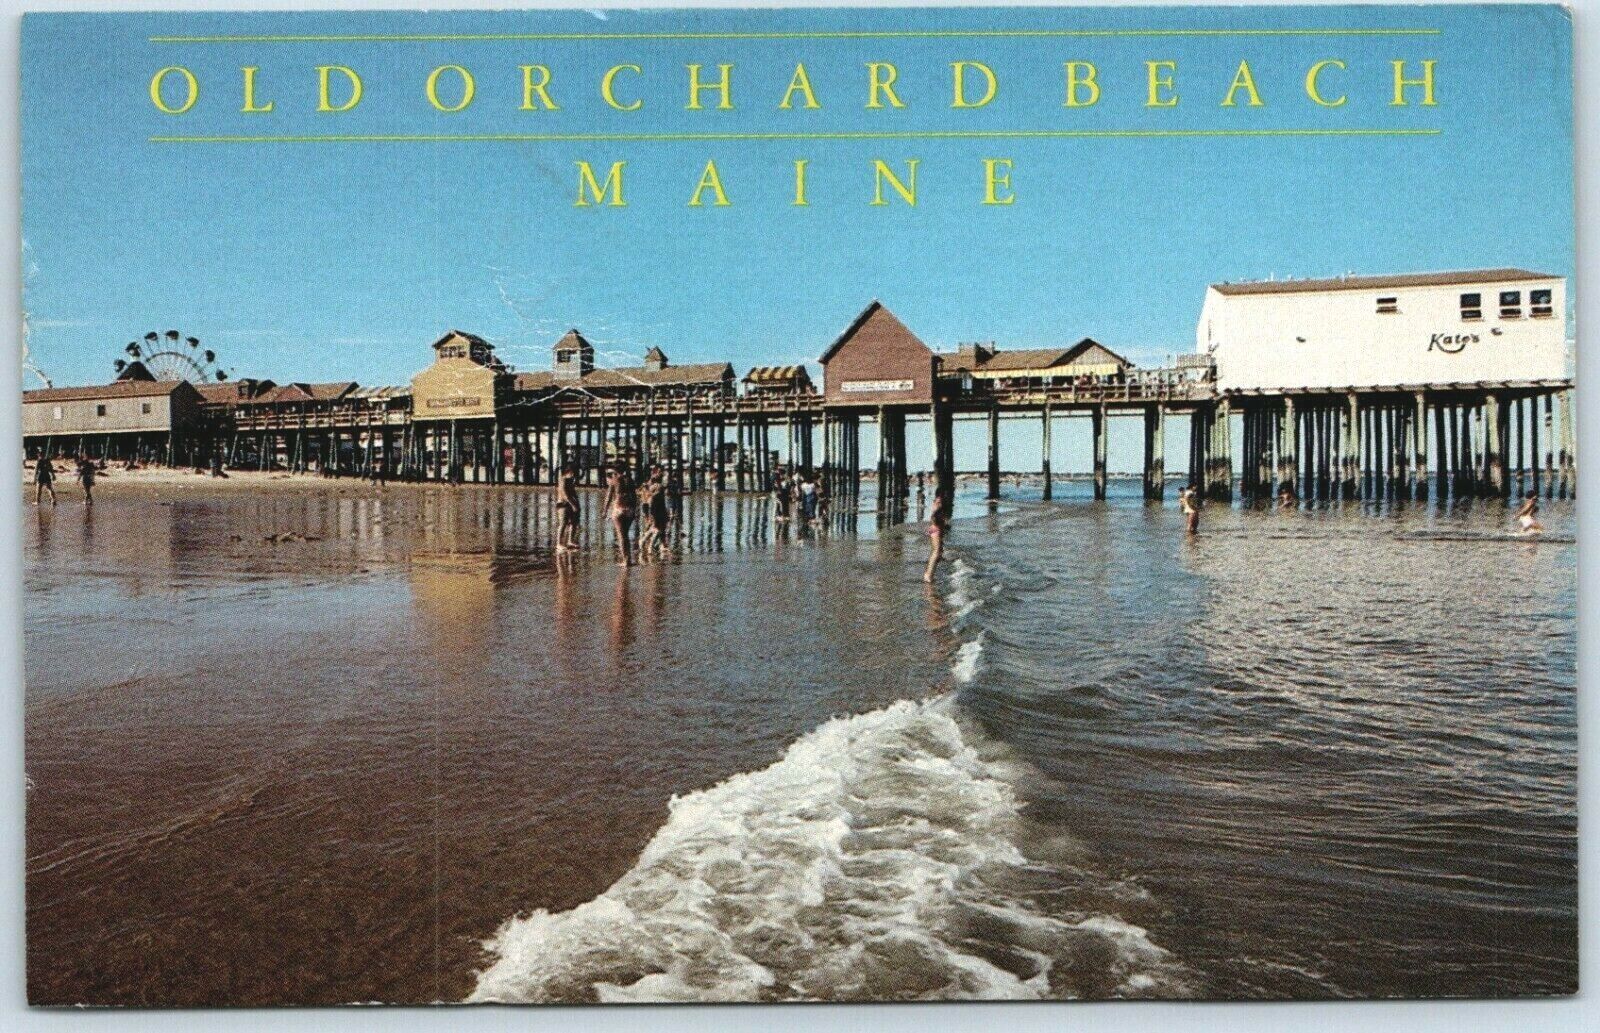 Postcard ME Pier Boathouse Summer Waves Water View Old Orchard Beach Maine   